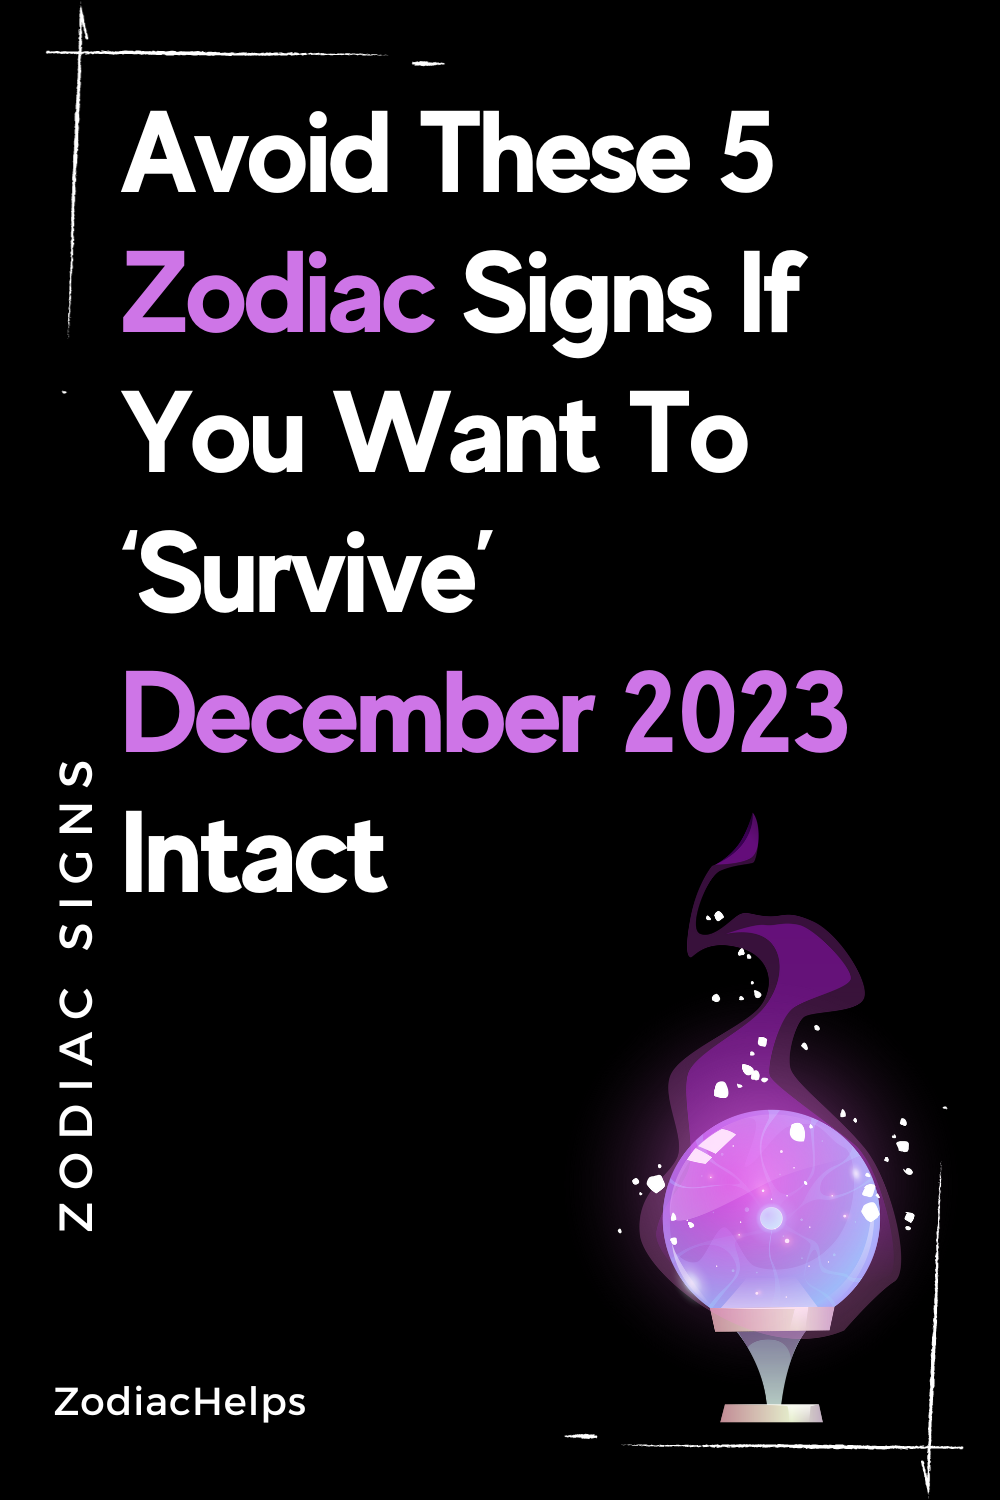 Avoid These 5 Zodiac Signs If You Want To ‘Survive’ December 2023 Intact